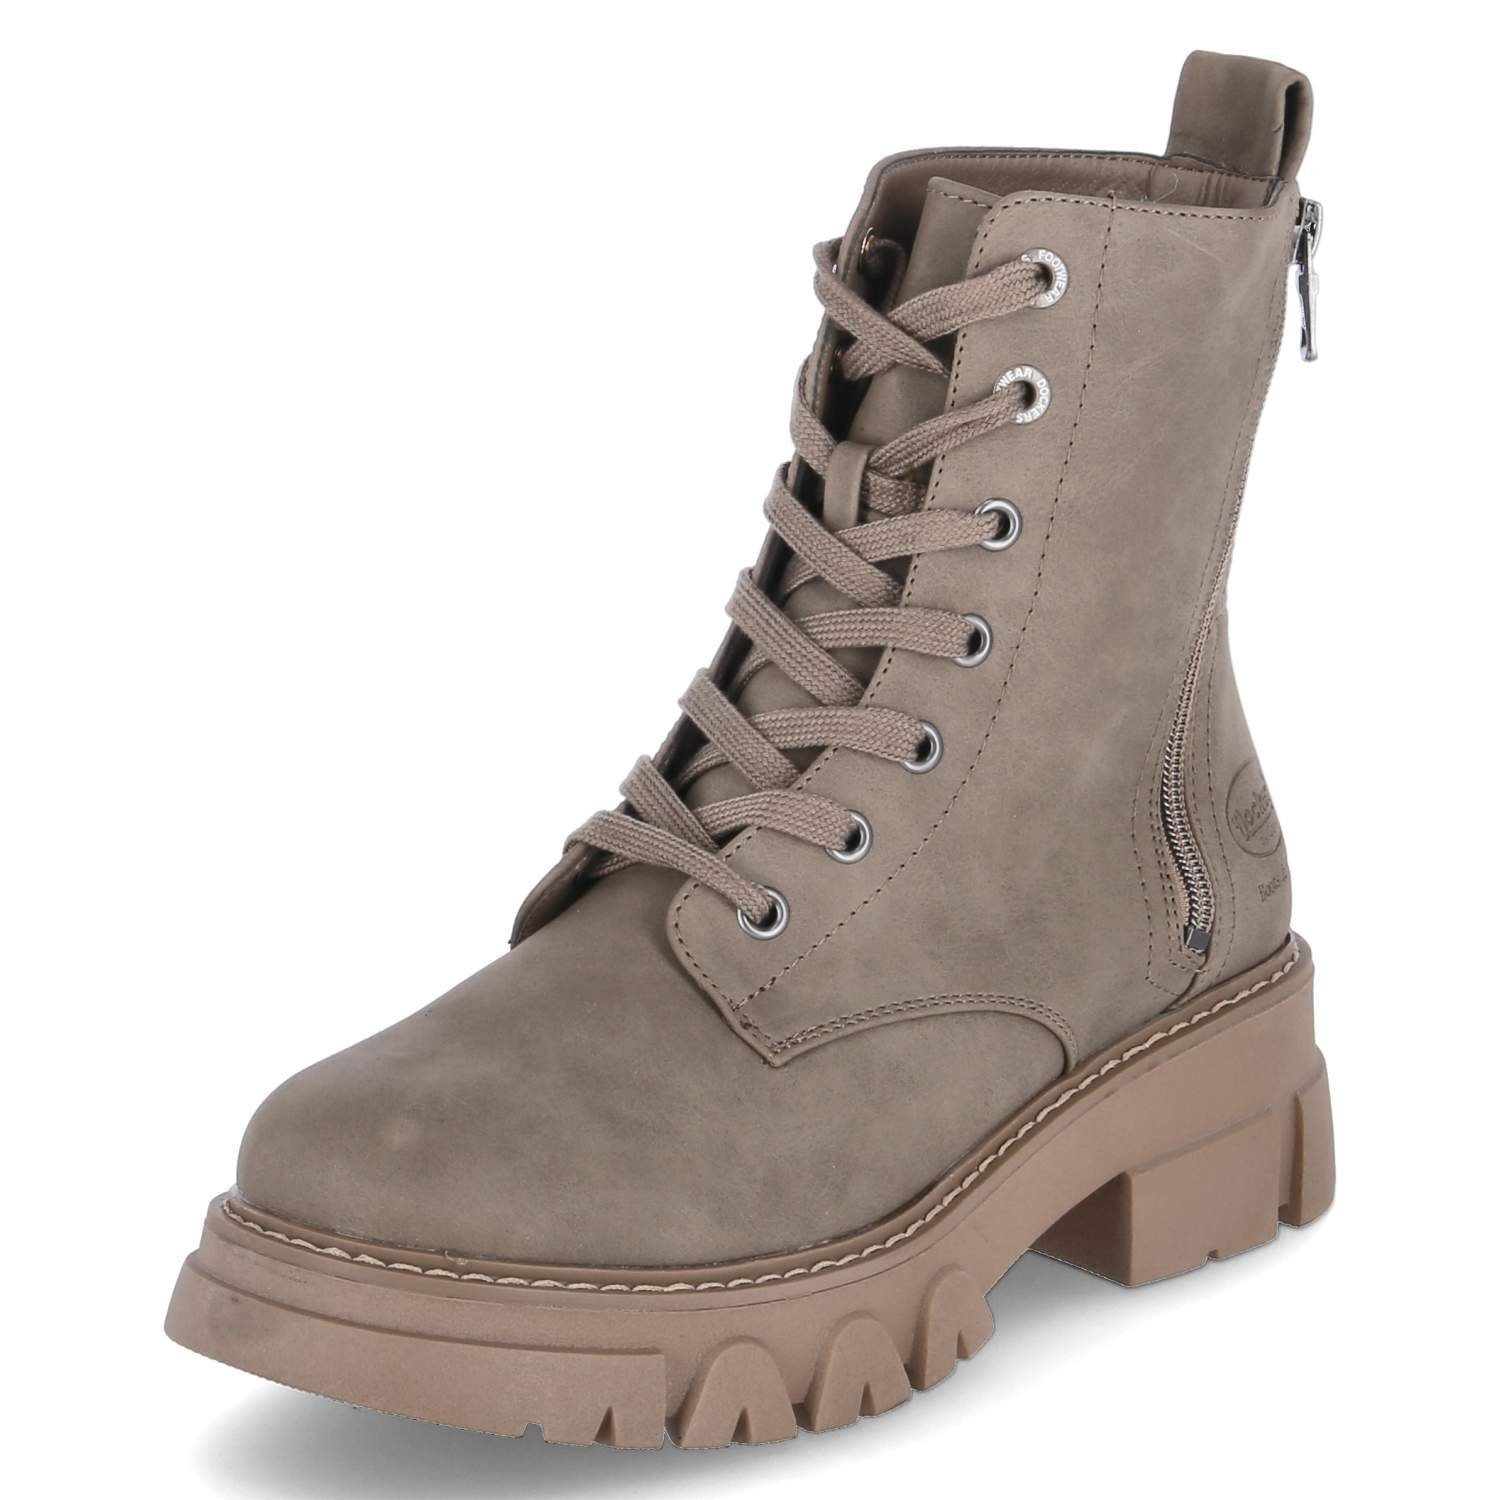 Dockers by Gerli Combat Schnürstiefel taupe 630430 Boots